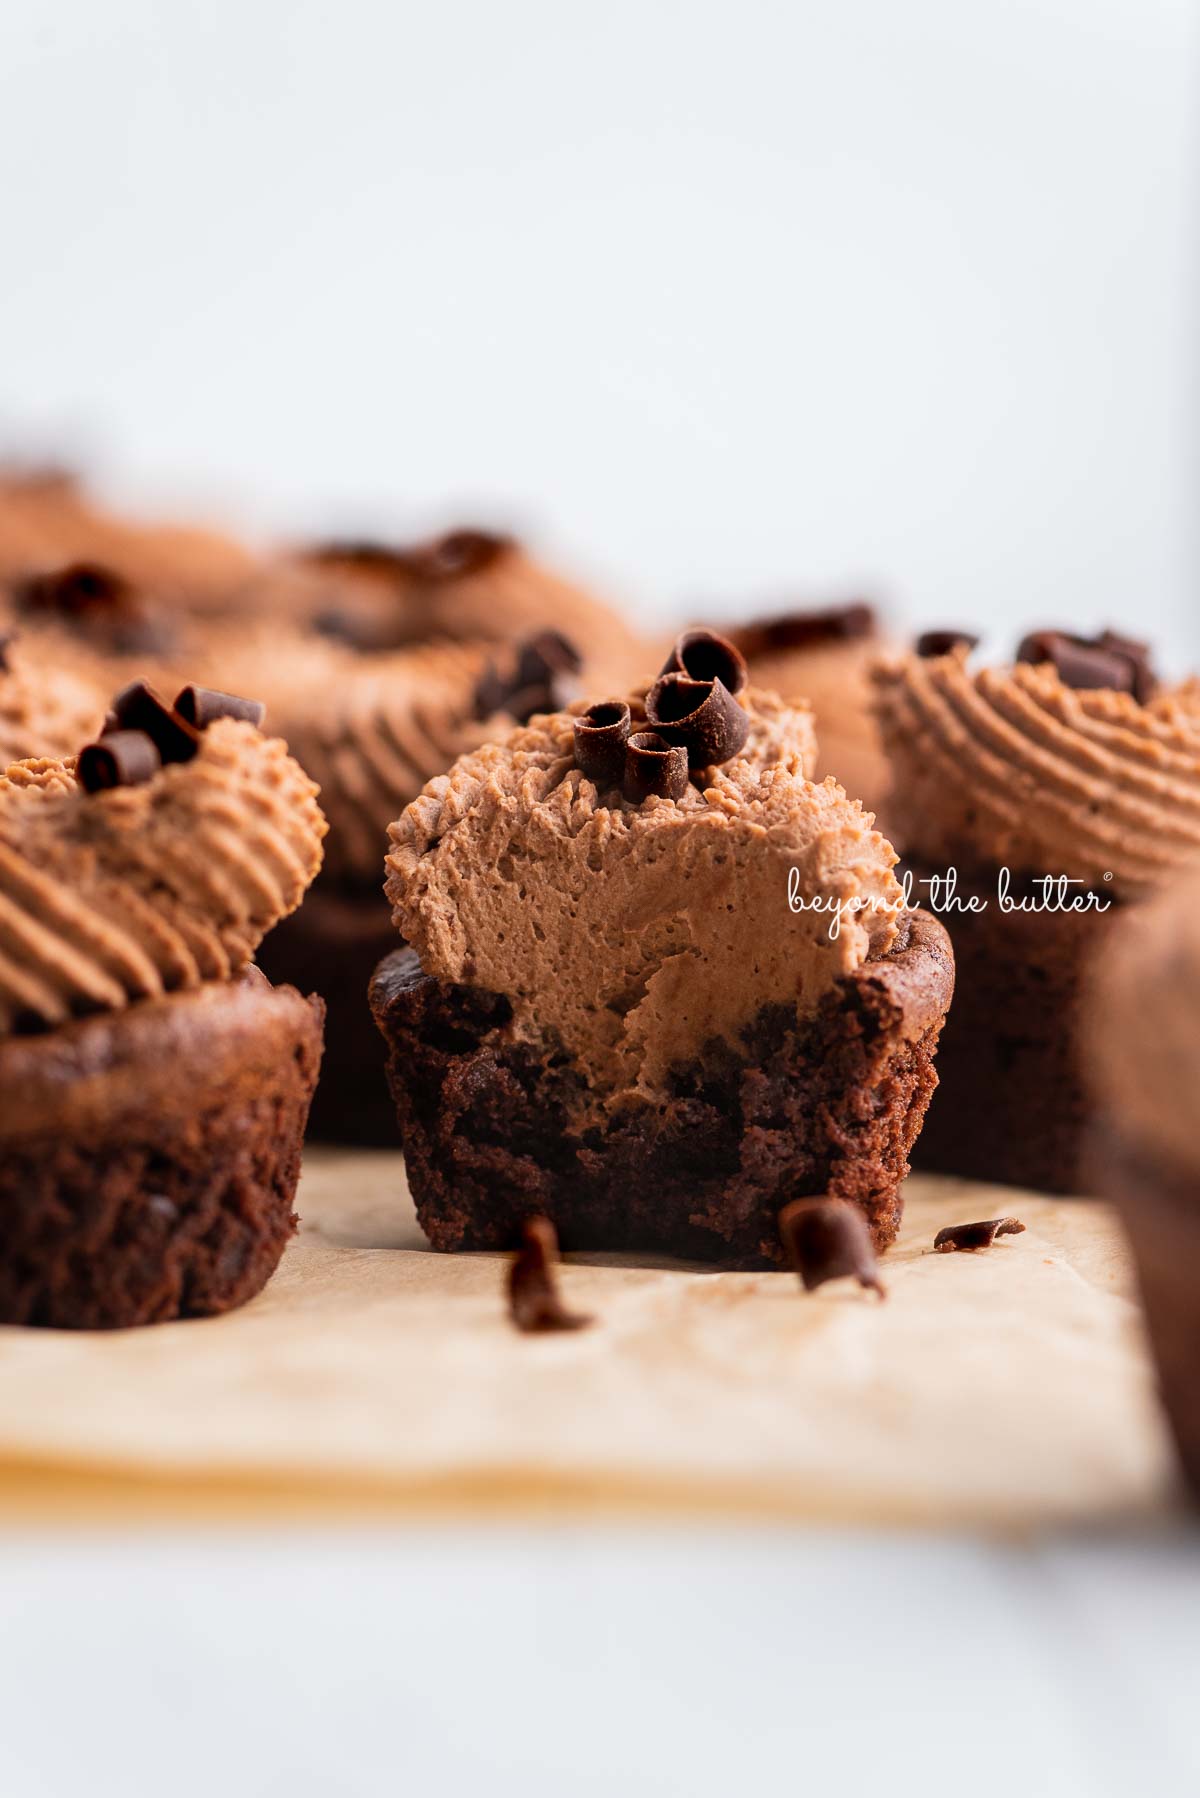 Mini brownie bites on natural parchment paper with one half eaten brownie bite in the center | © Beyond the Butter®